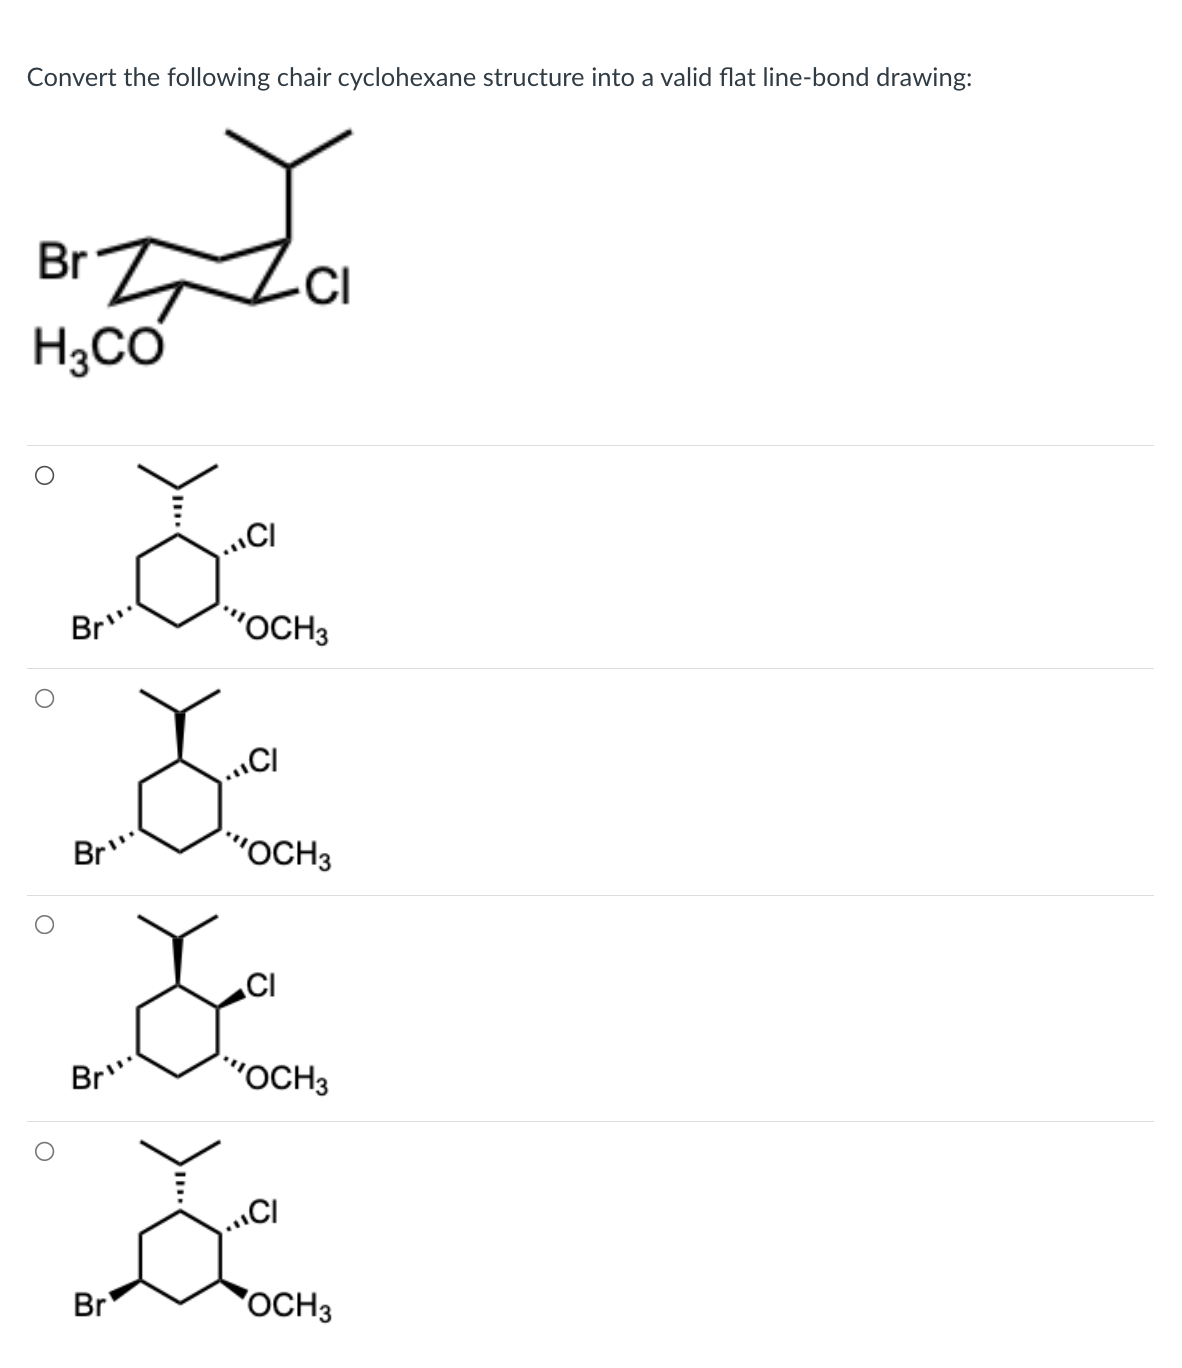 Convert the following chair cyclohexane structure into a valid flat line-bond drawing:
Brcl
H3CO
Br"
Br"
CI
"OCH3
CI
Le
Dian
D
"OCH3
Br
OCH 3
Bri
"OCH3
CI
CI